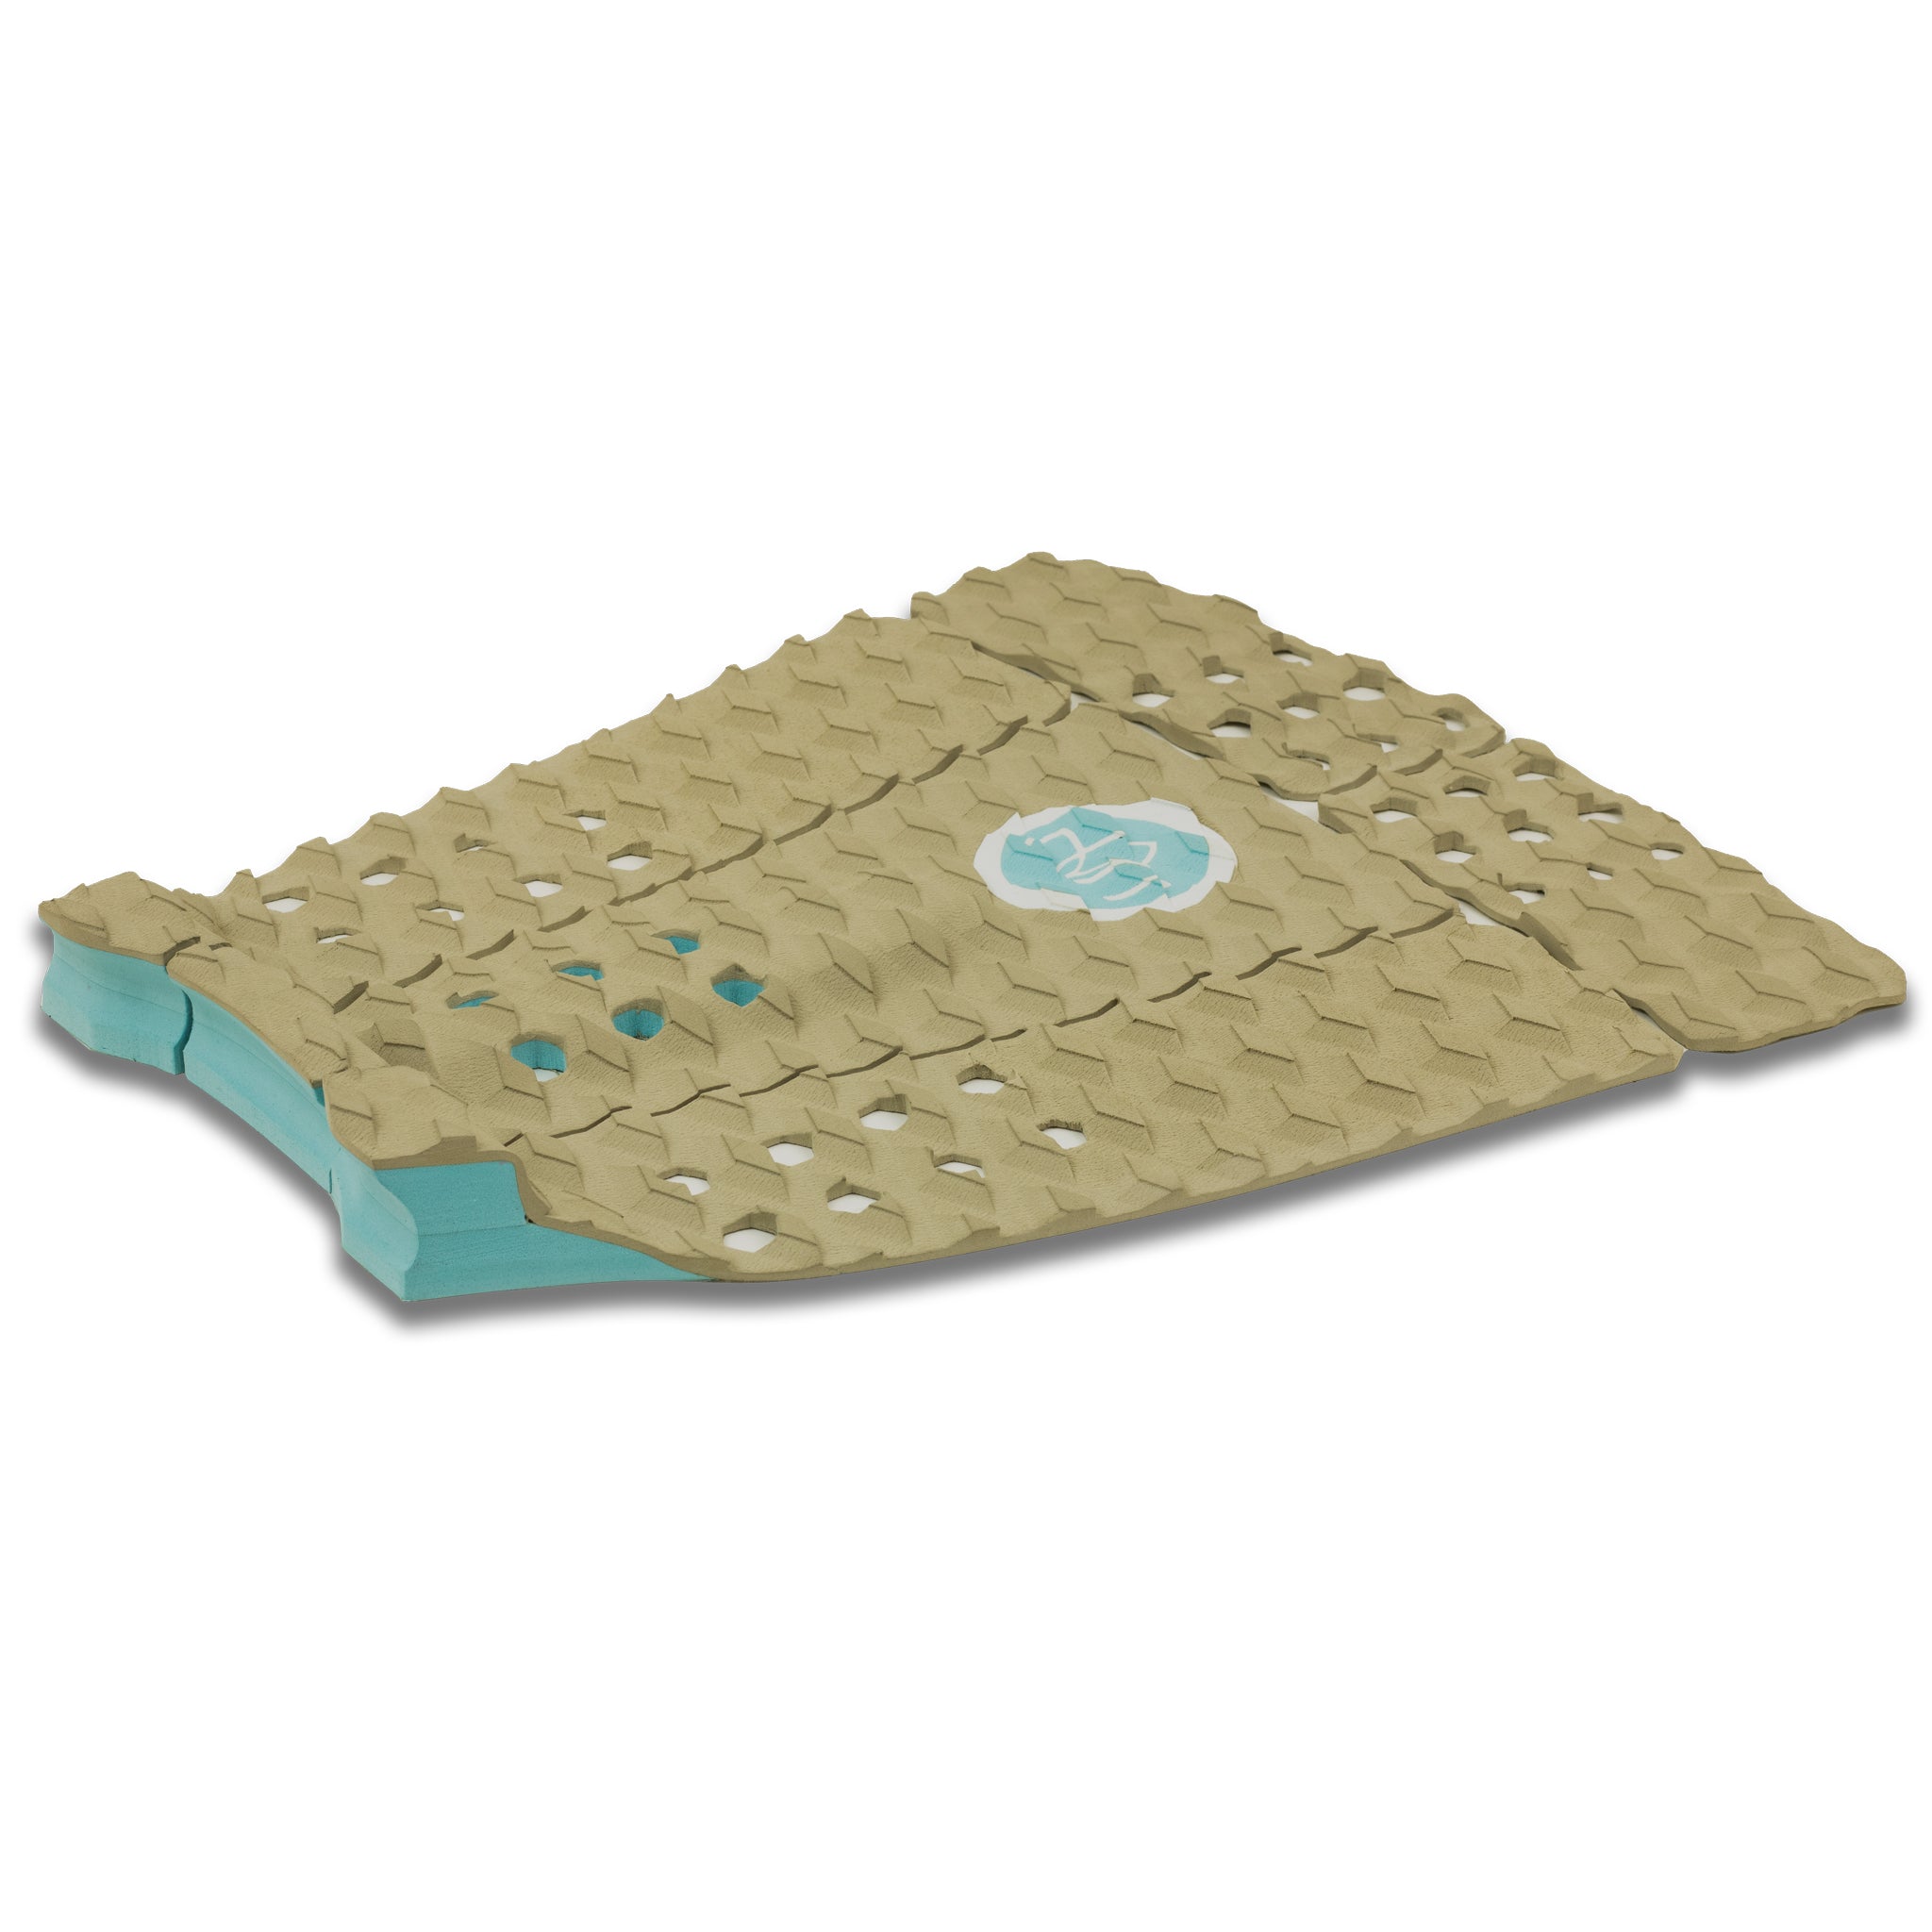 5 Piece Traction Pad